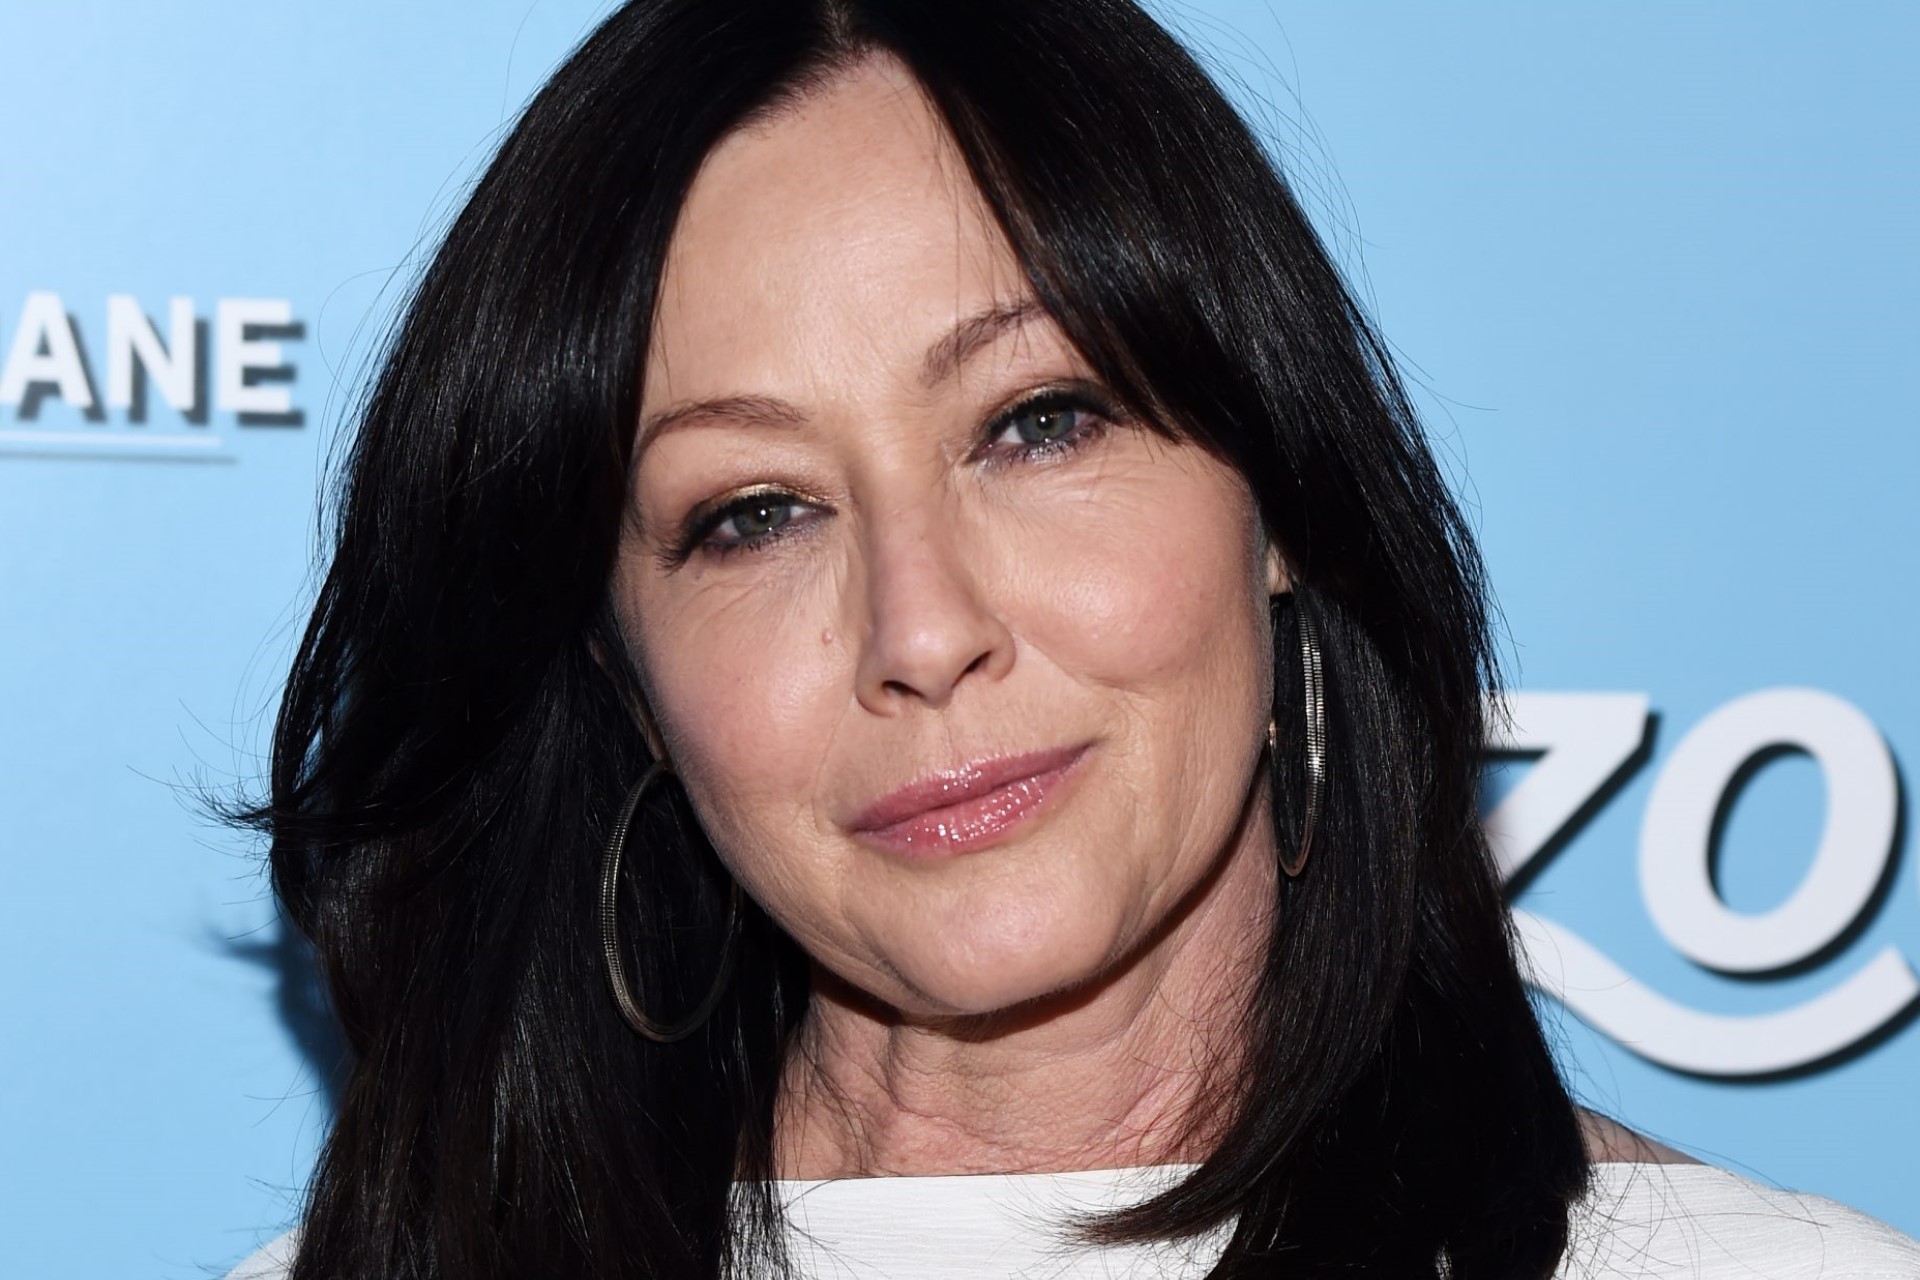 The death of Shannen Doherty